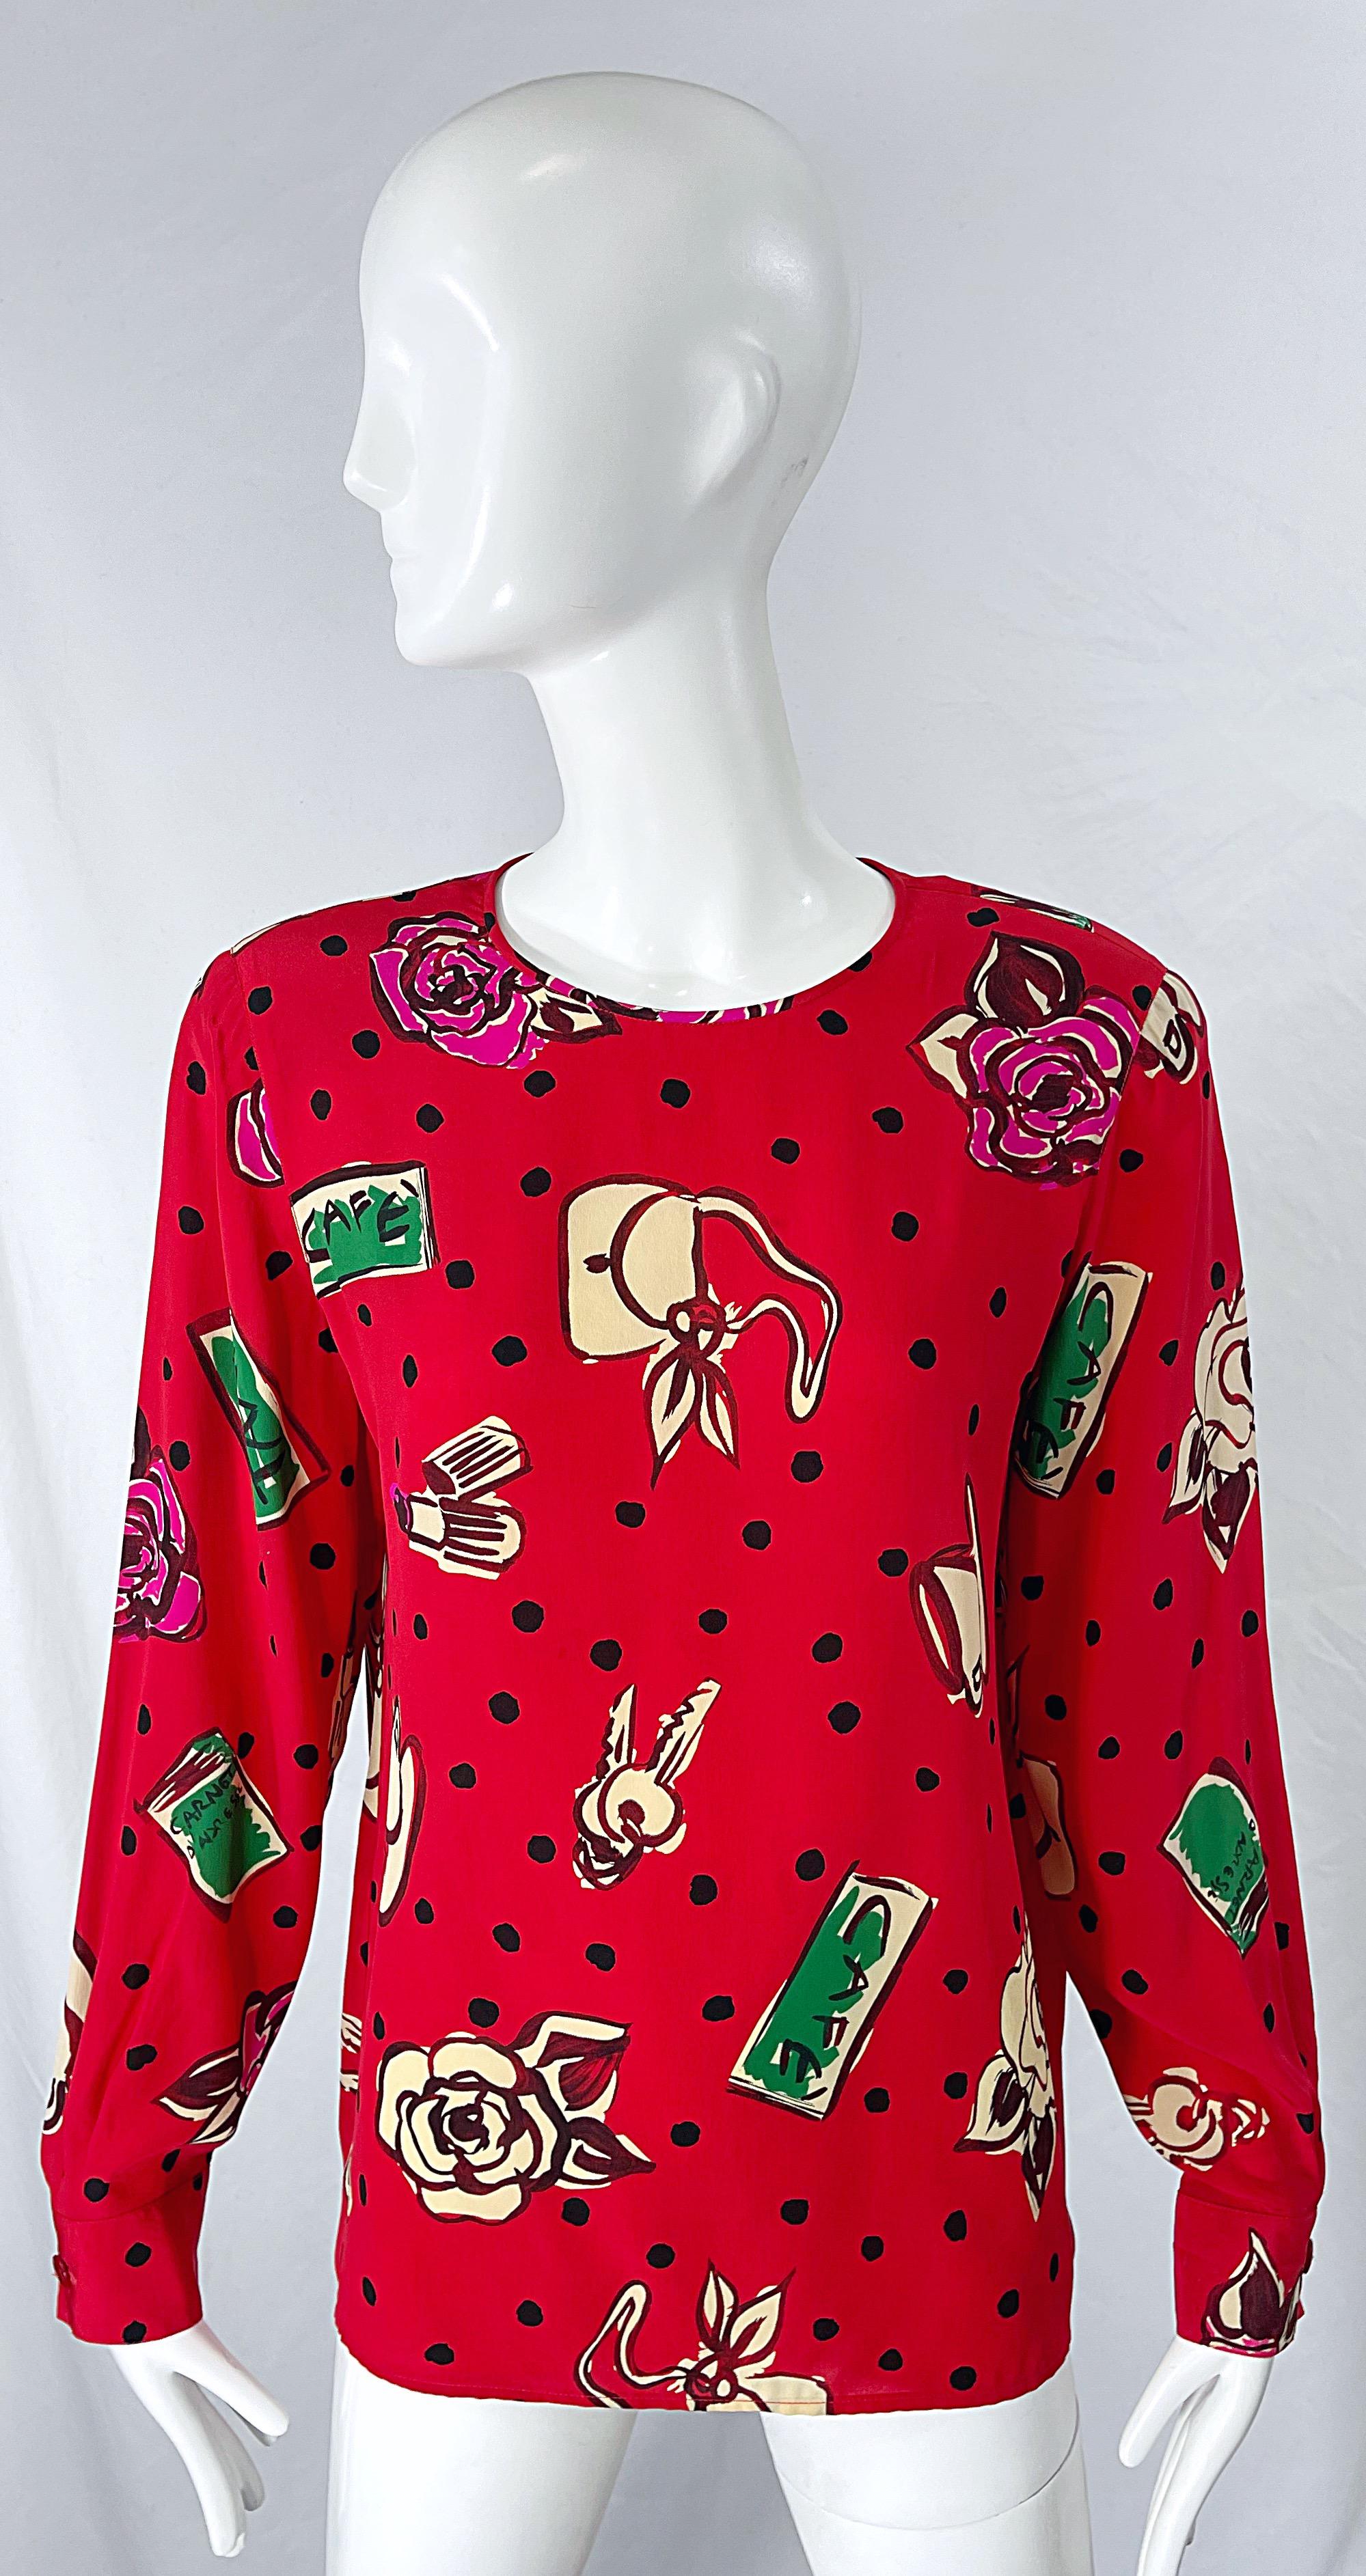 Chic mid 90s EMANUEL UNGARO lipstick red vintage silk novelty blouse ! Features prints of handbags, keys, lipstick, roses, coffee cups, cafe, and polka dots throughout. Buttons up the top back center neck. Can easily be dressed up or down, sleeves